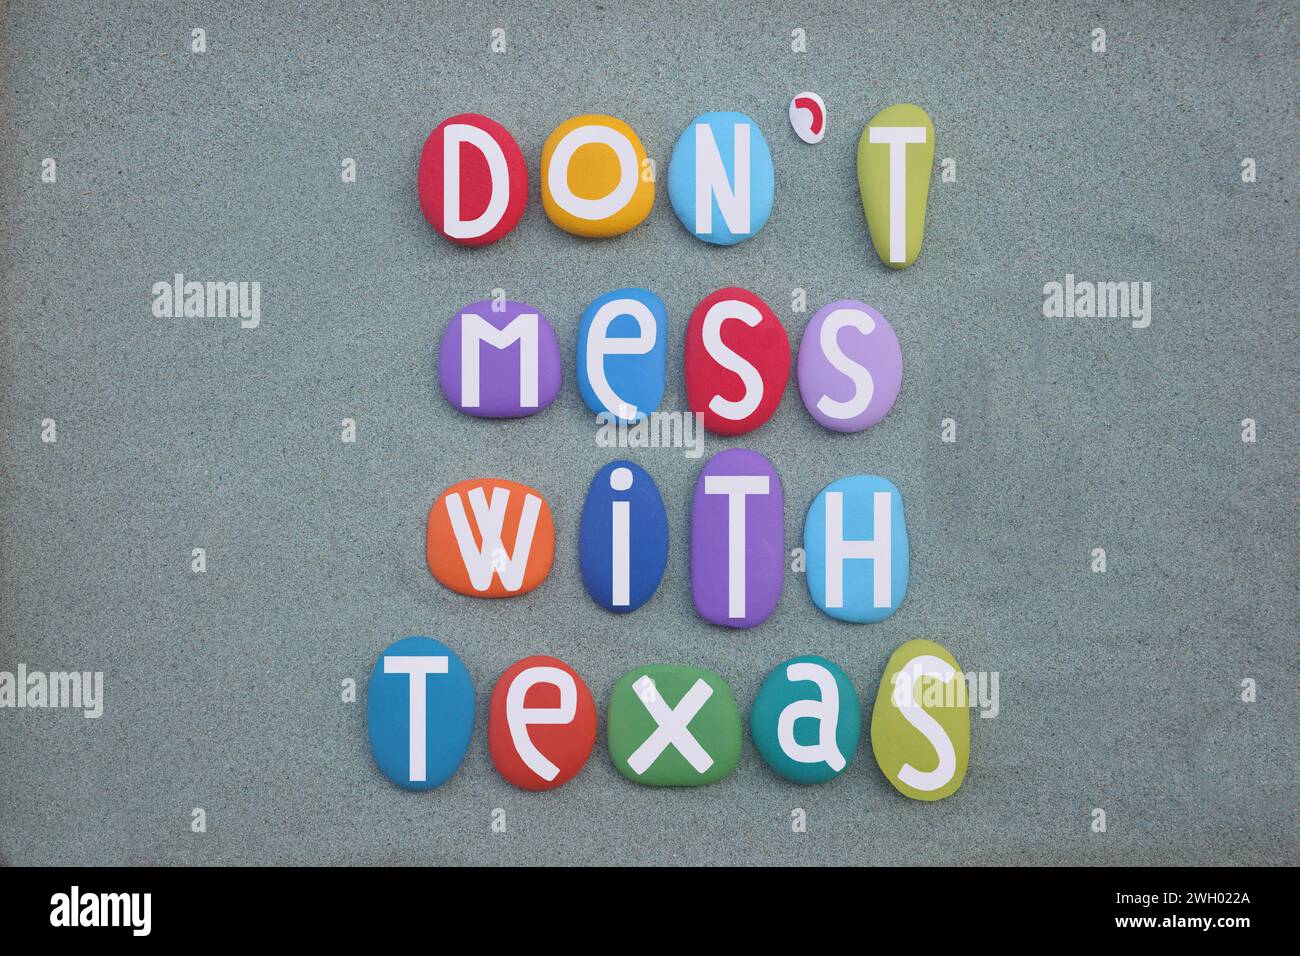 Don't mess with Texas, creative slogan composed with hand painted multi colored stone letters over green sand Stock Photo